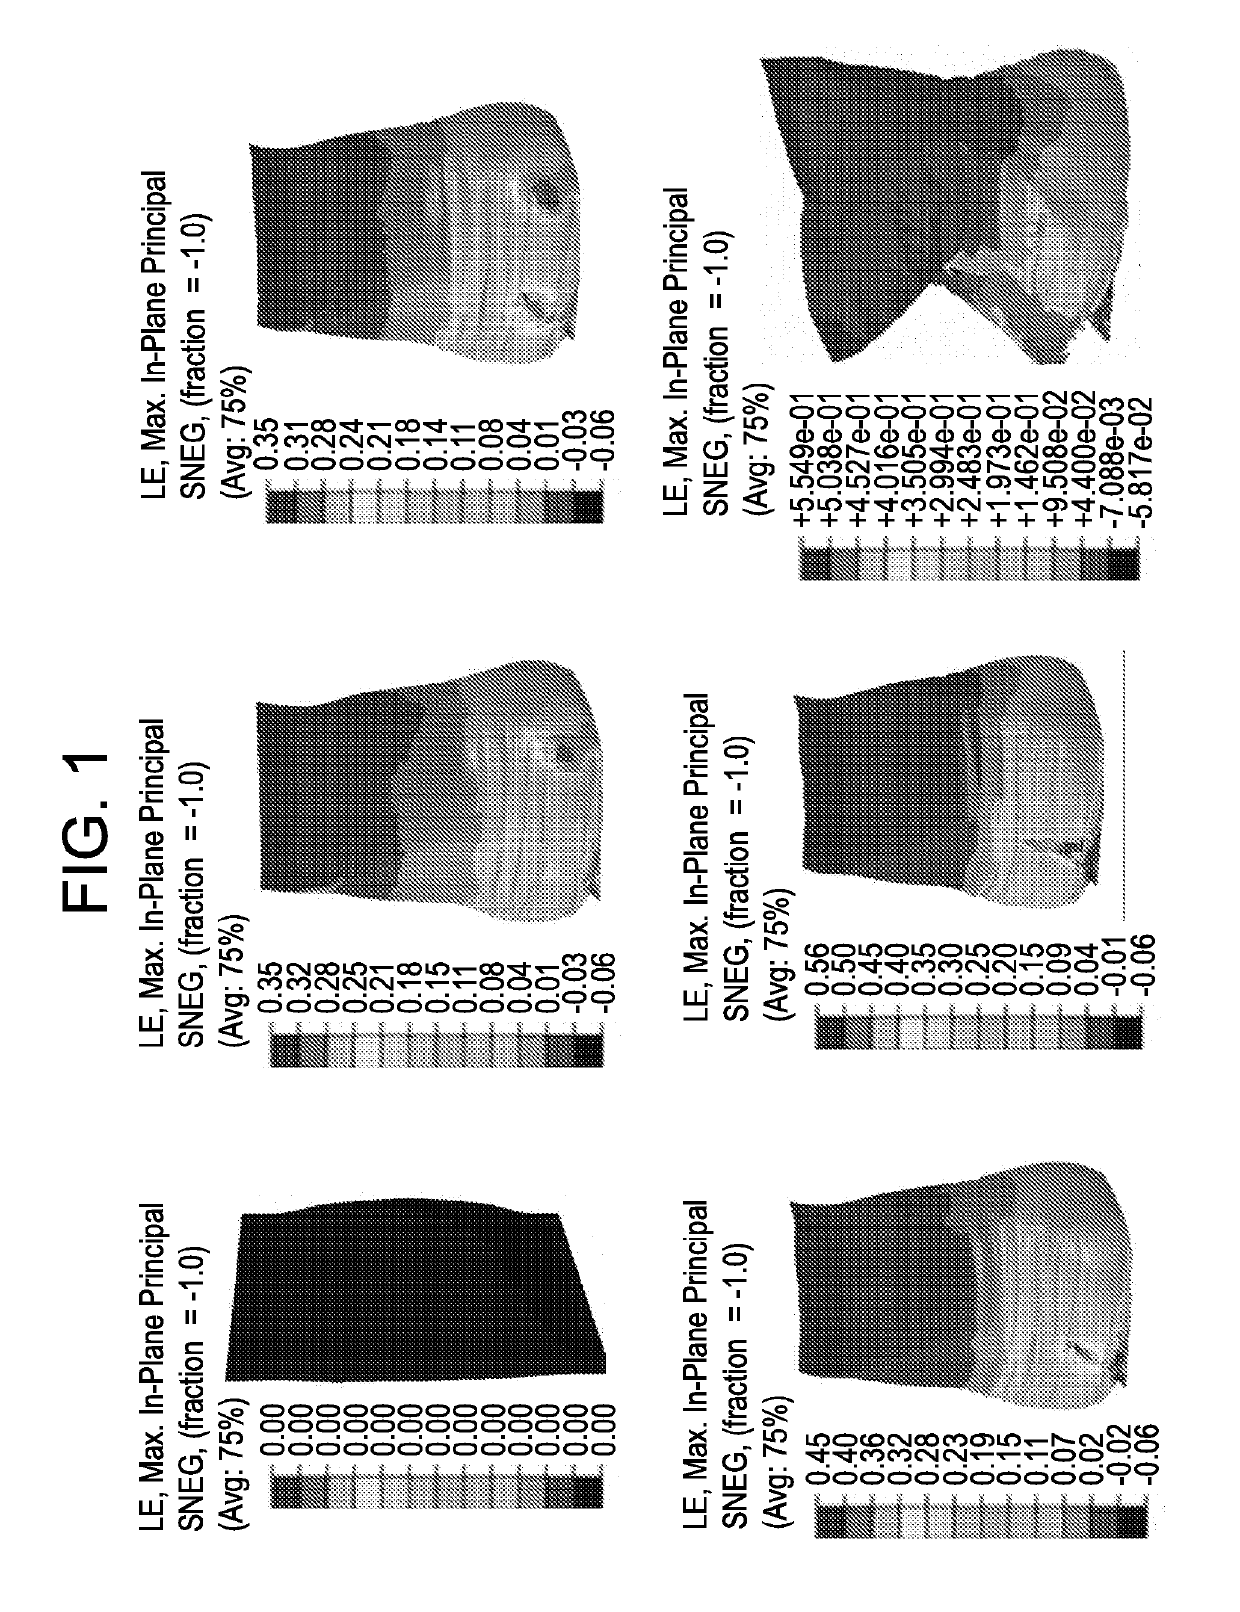 Methods for selecting film structures for packages